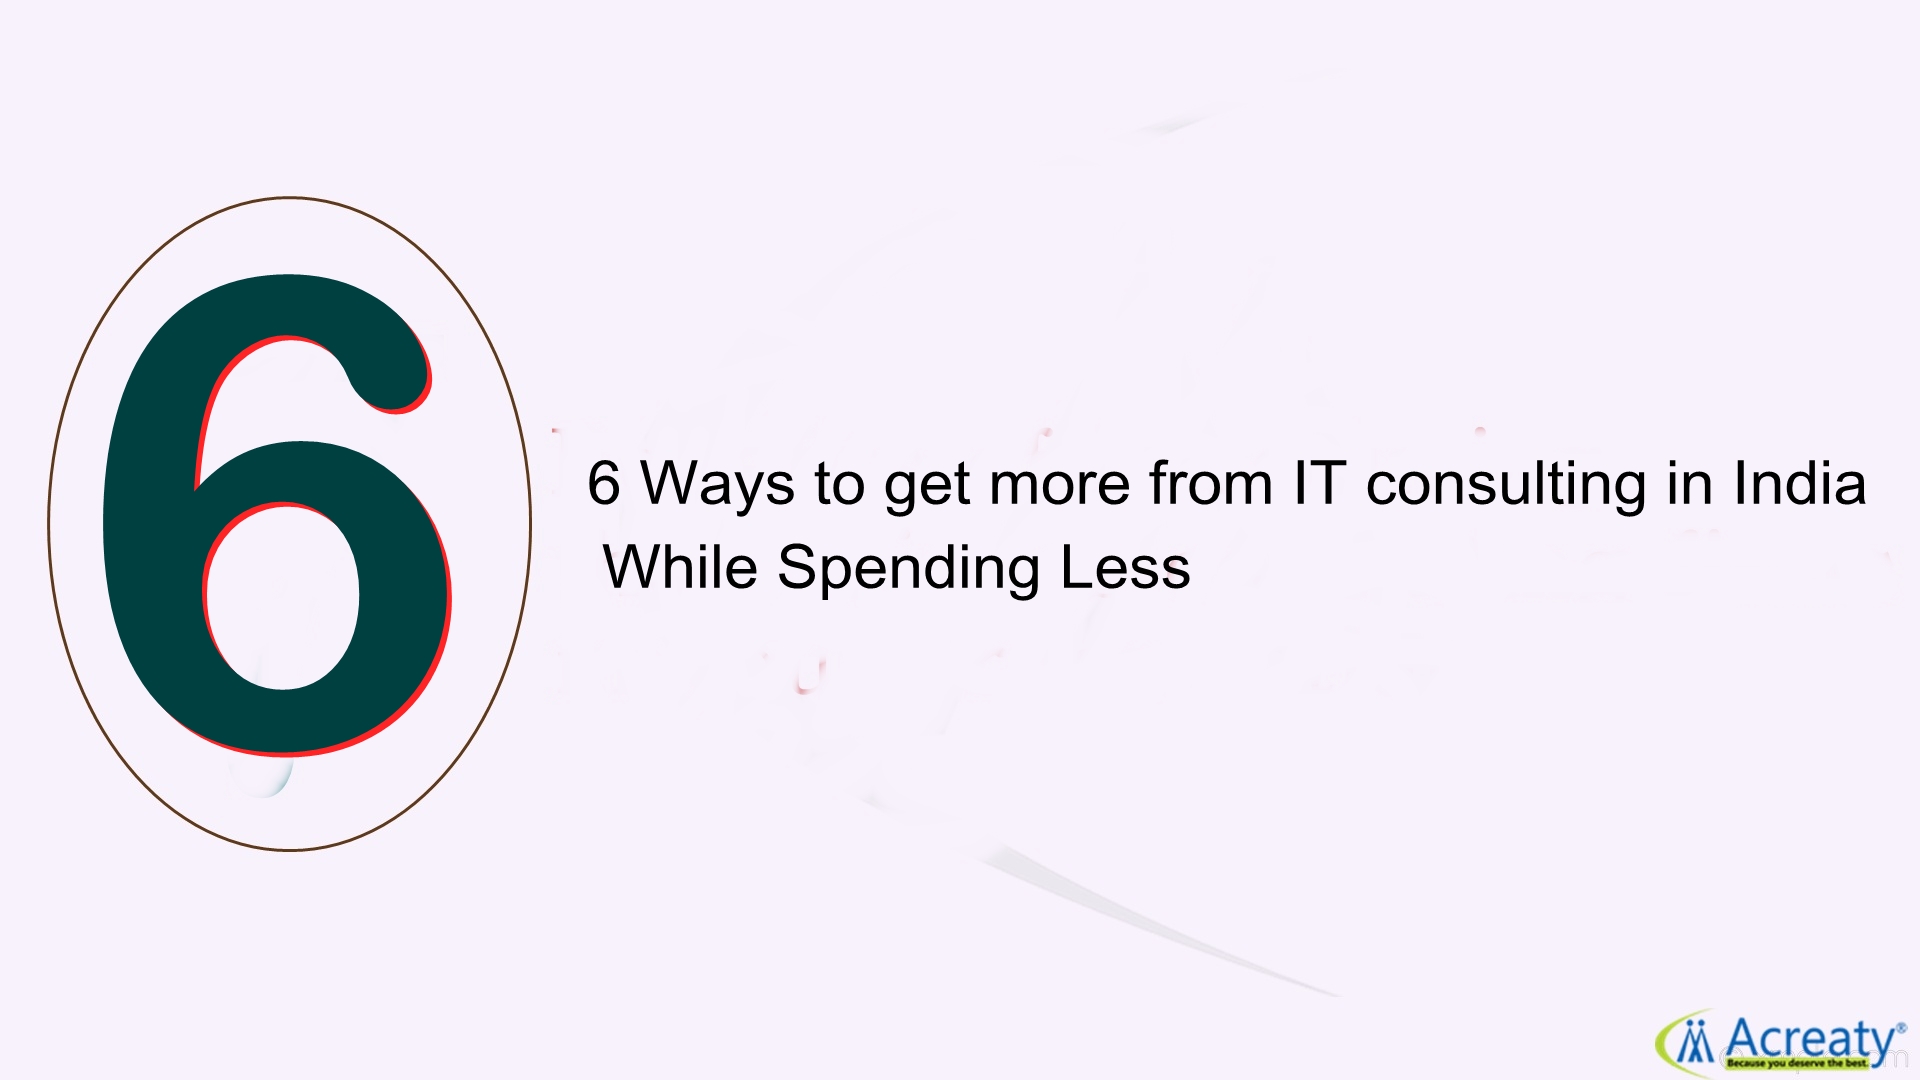 6 Ways to get more from IT consulting in India While Spending Less